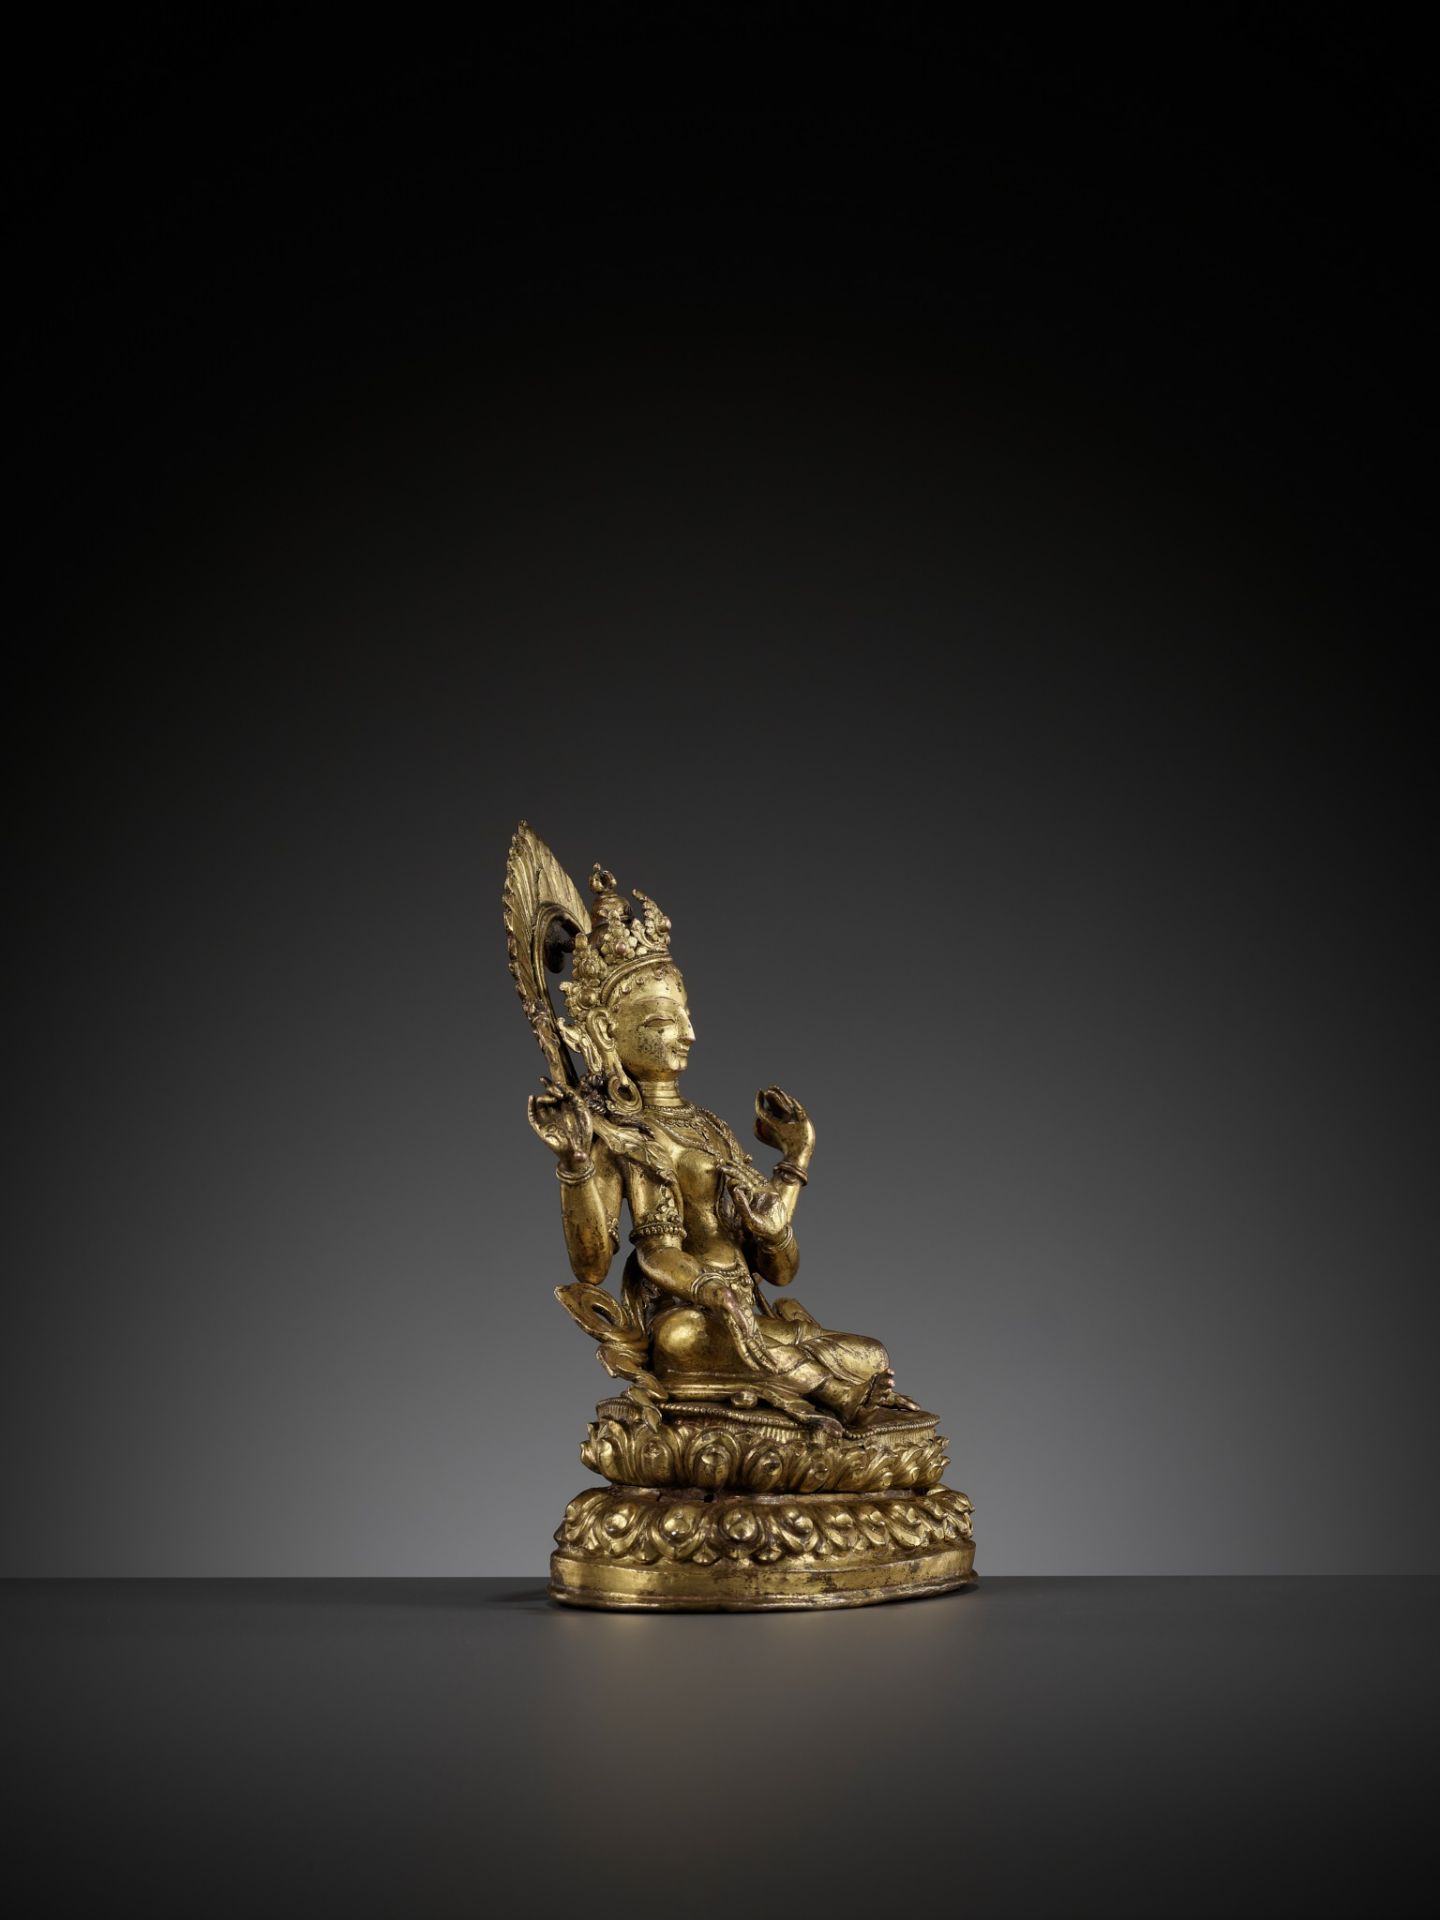 A CAST AND REPOUSSE GILT COPPER ALLOY FIGURE OF TARA, NEPAL, 18TH-19TH CENTURY - Image 11 of 13